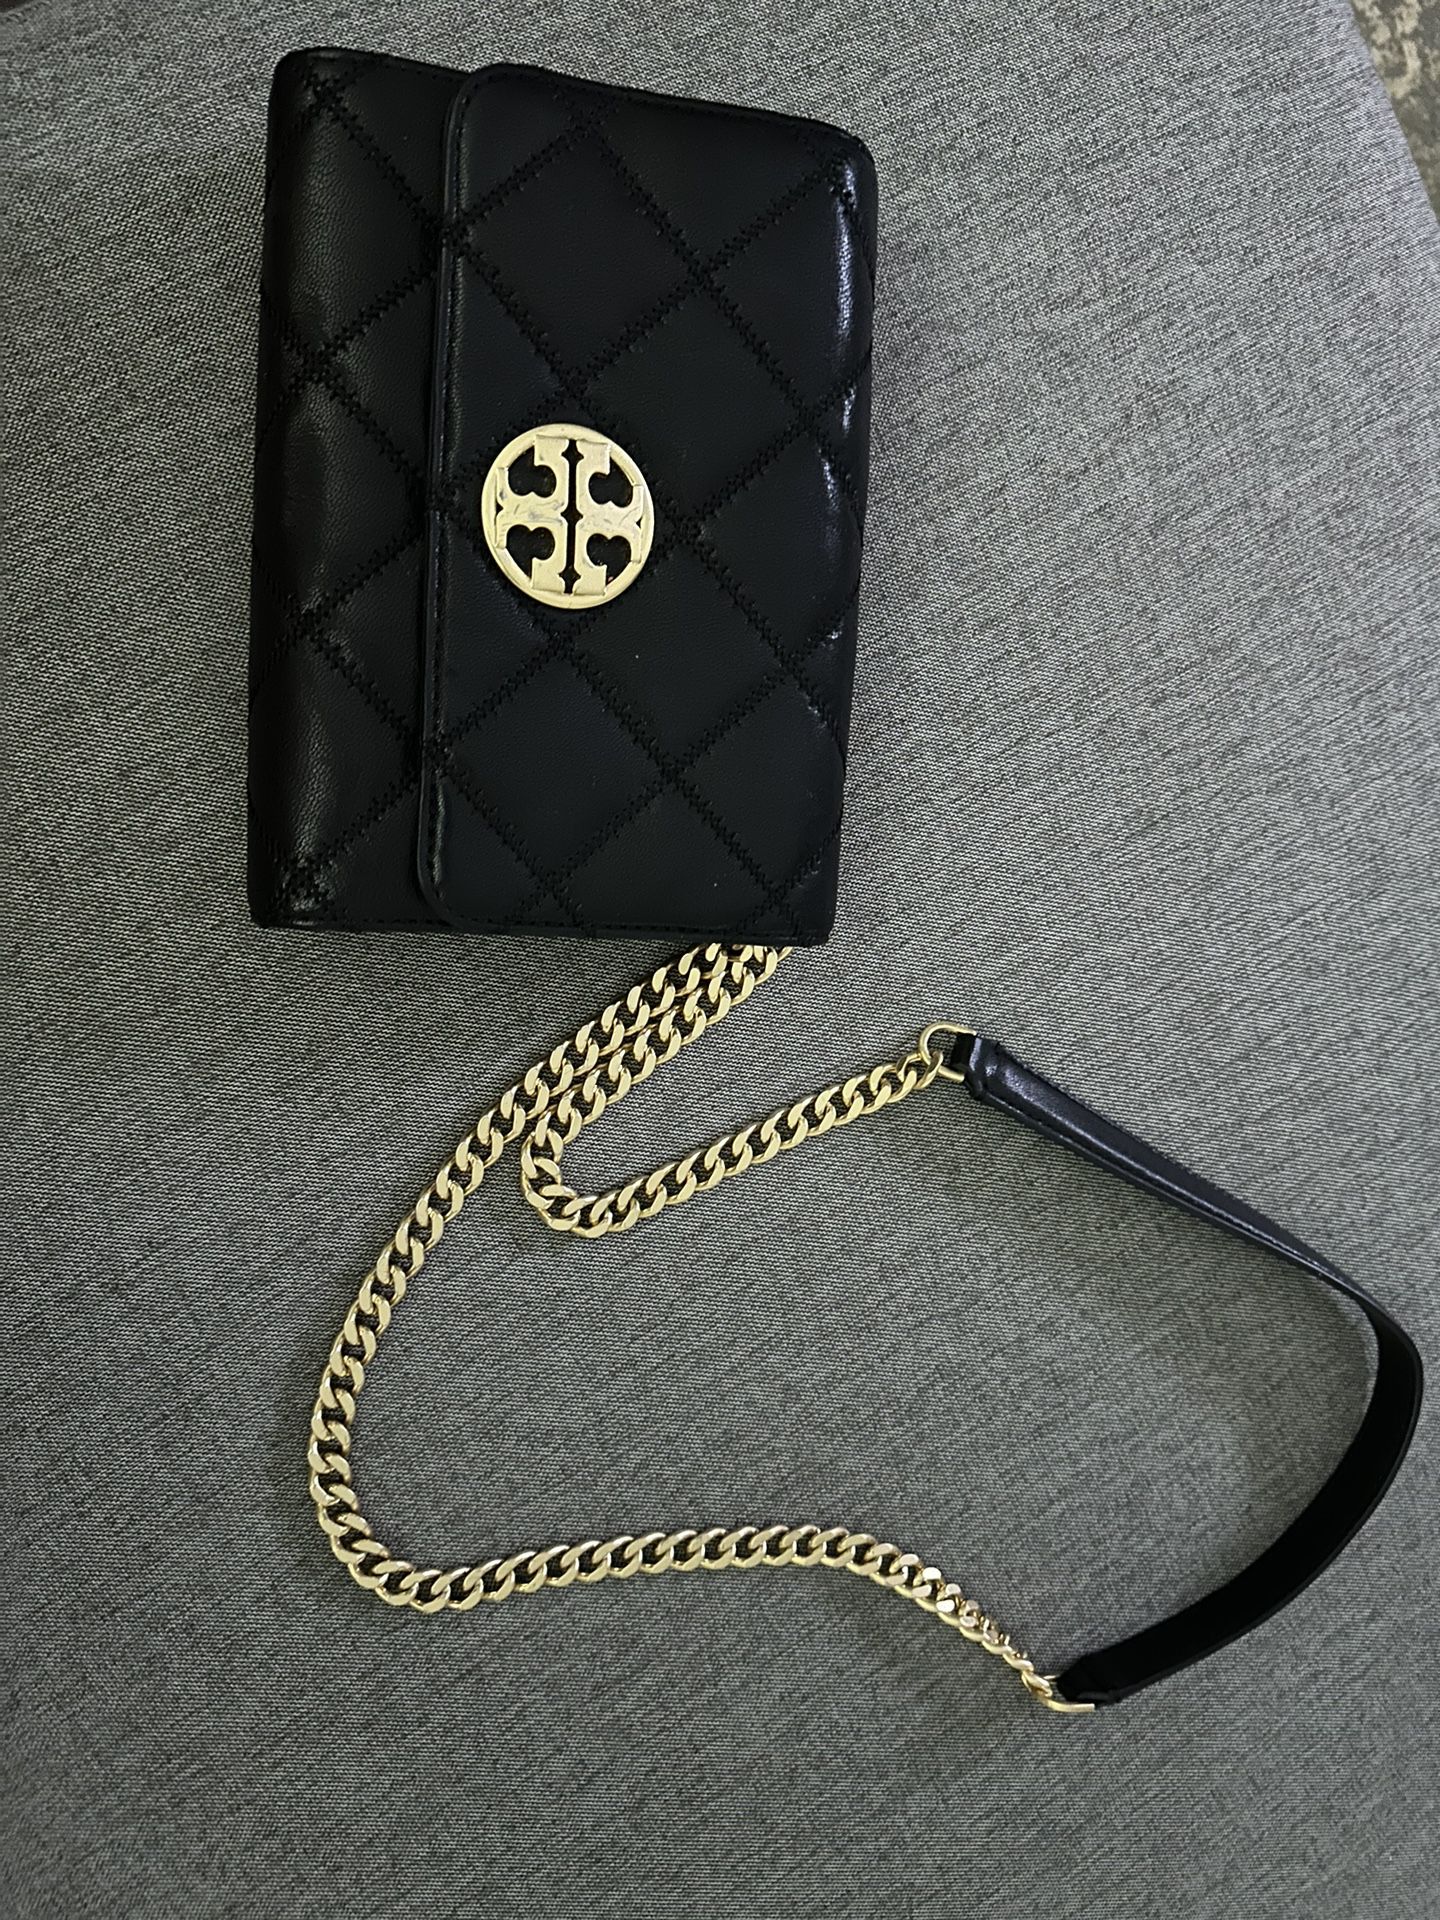 Tory Burch Black Bag With Gold Chain 